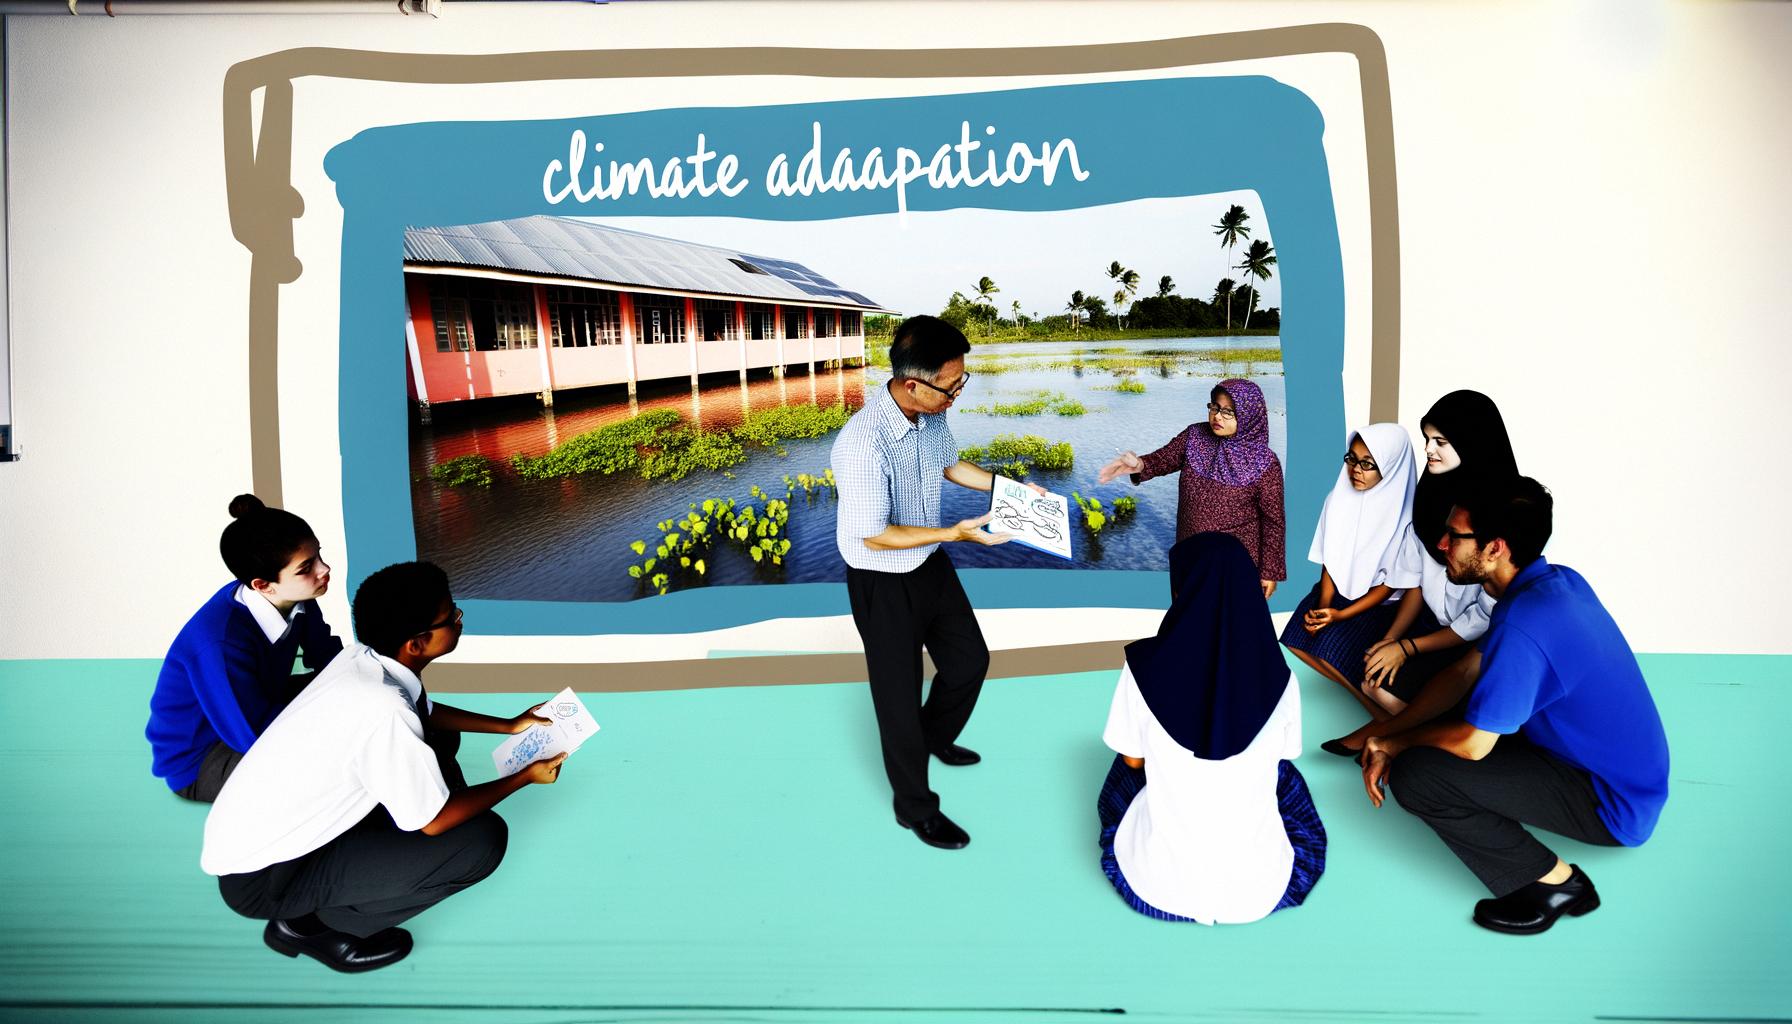 Significant investment in green school infrastructure is crucial amid climate challenges.